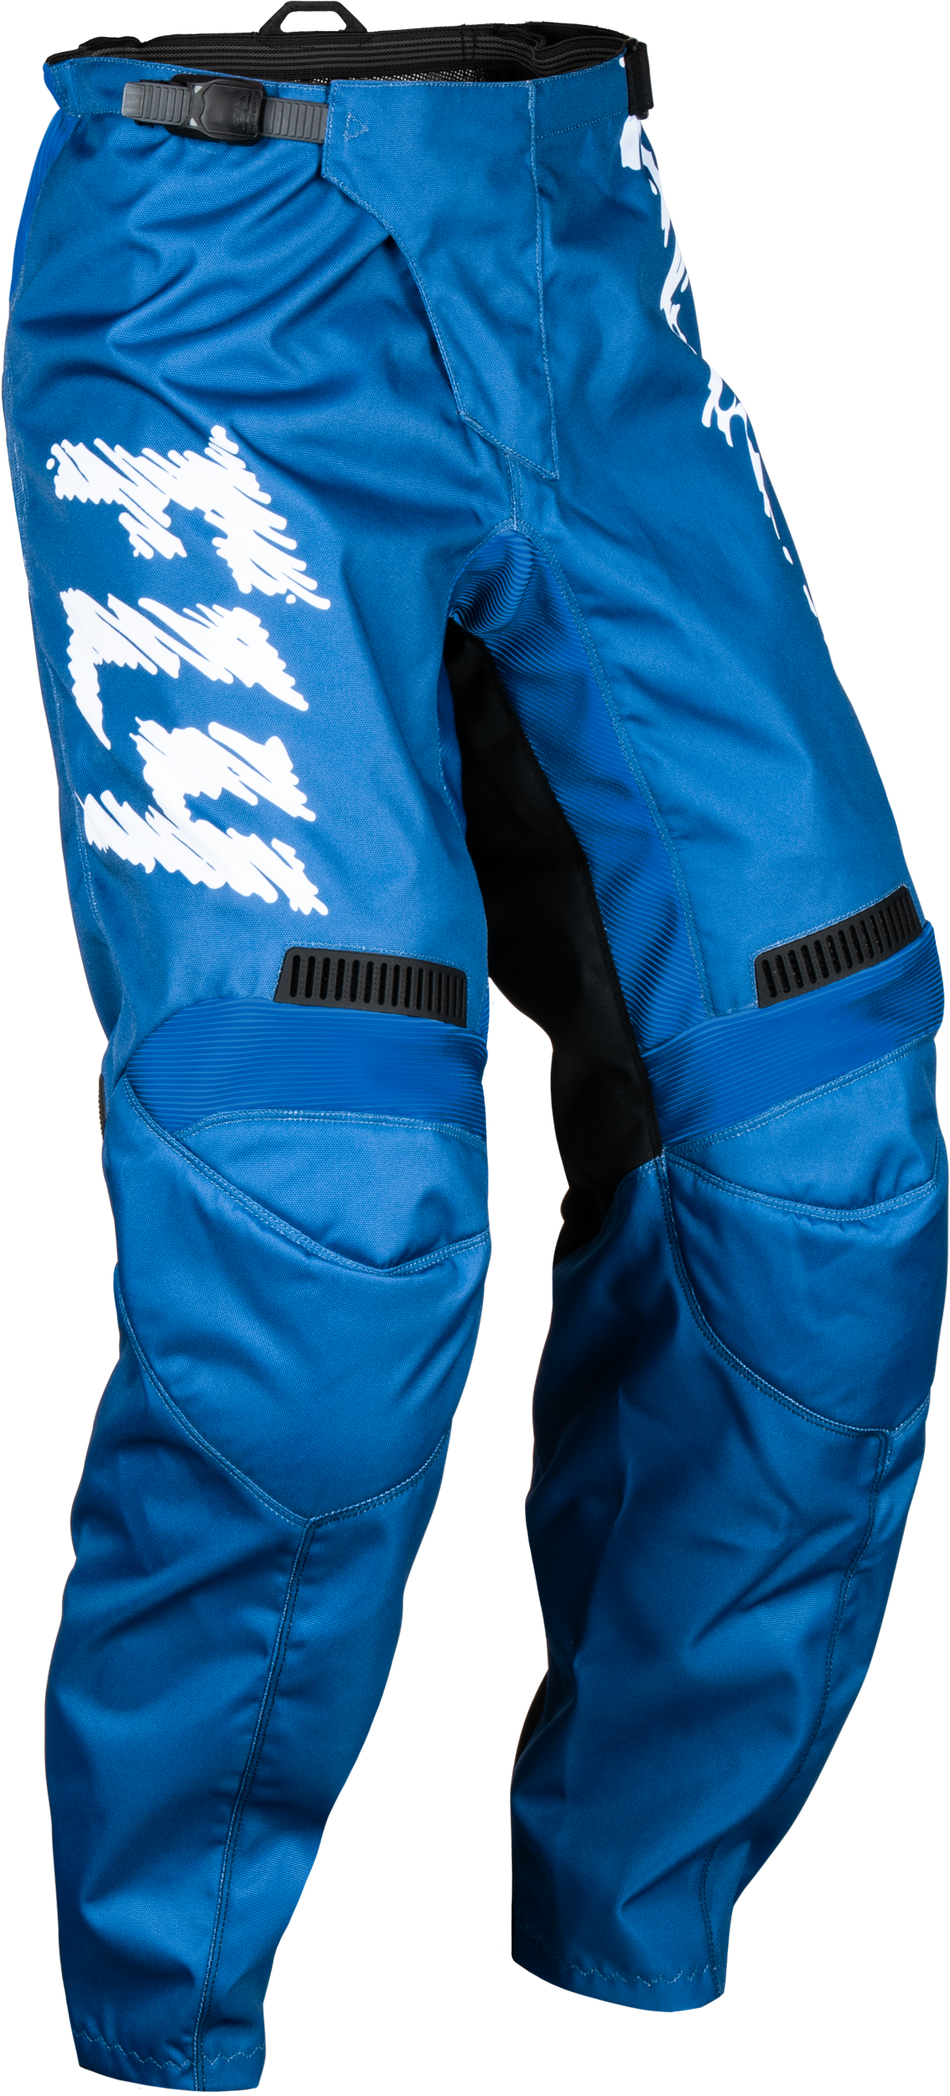 FLY RACING Youth F-16 Pants True Blue/White Sz 20 377-23320